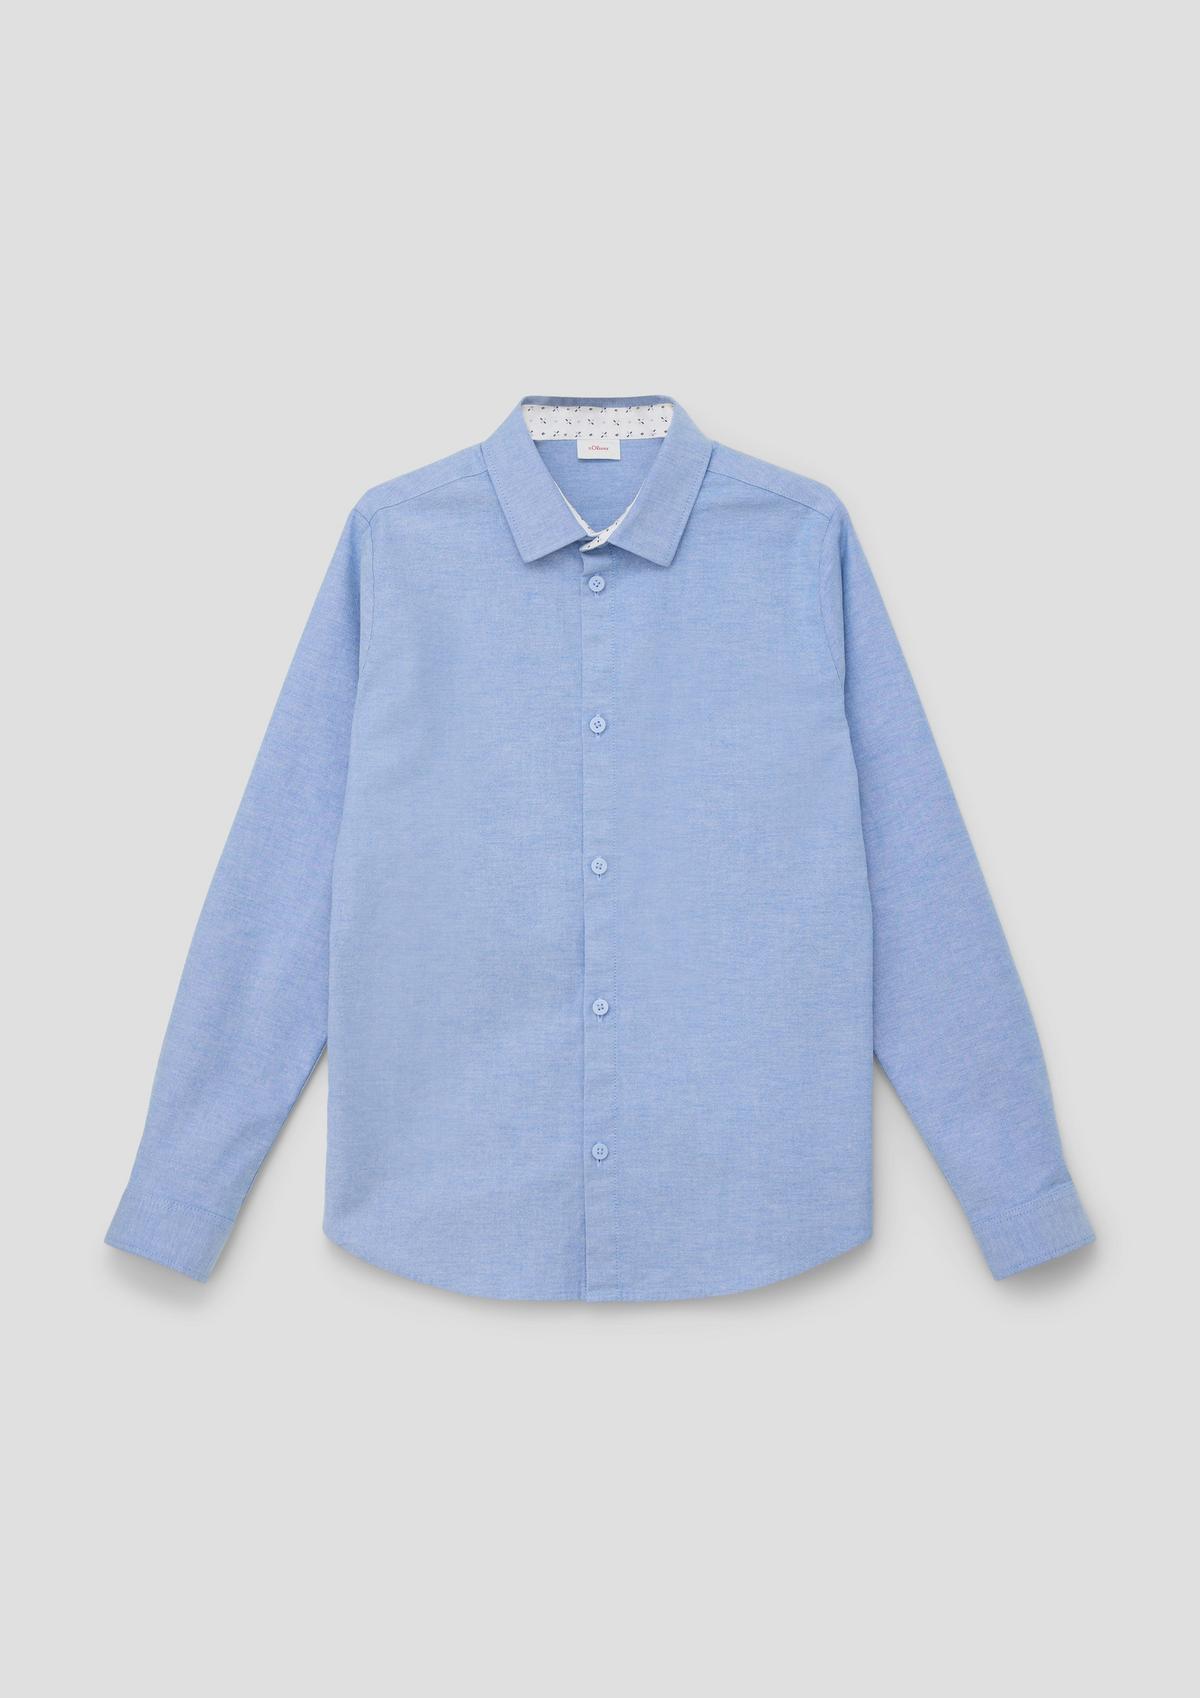 s.Oliver Oxford shirt made of stretch cotton